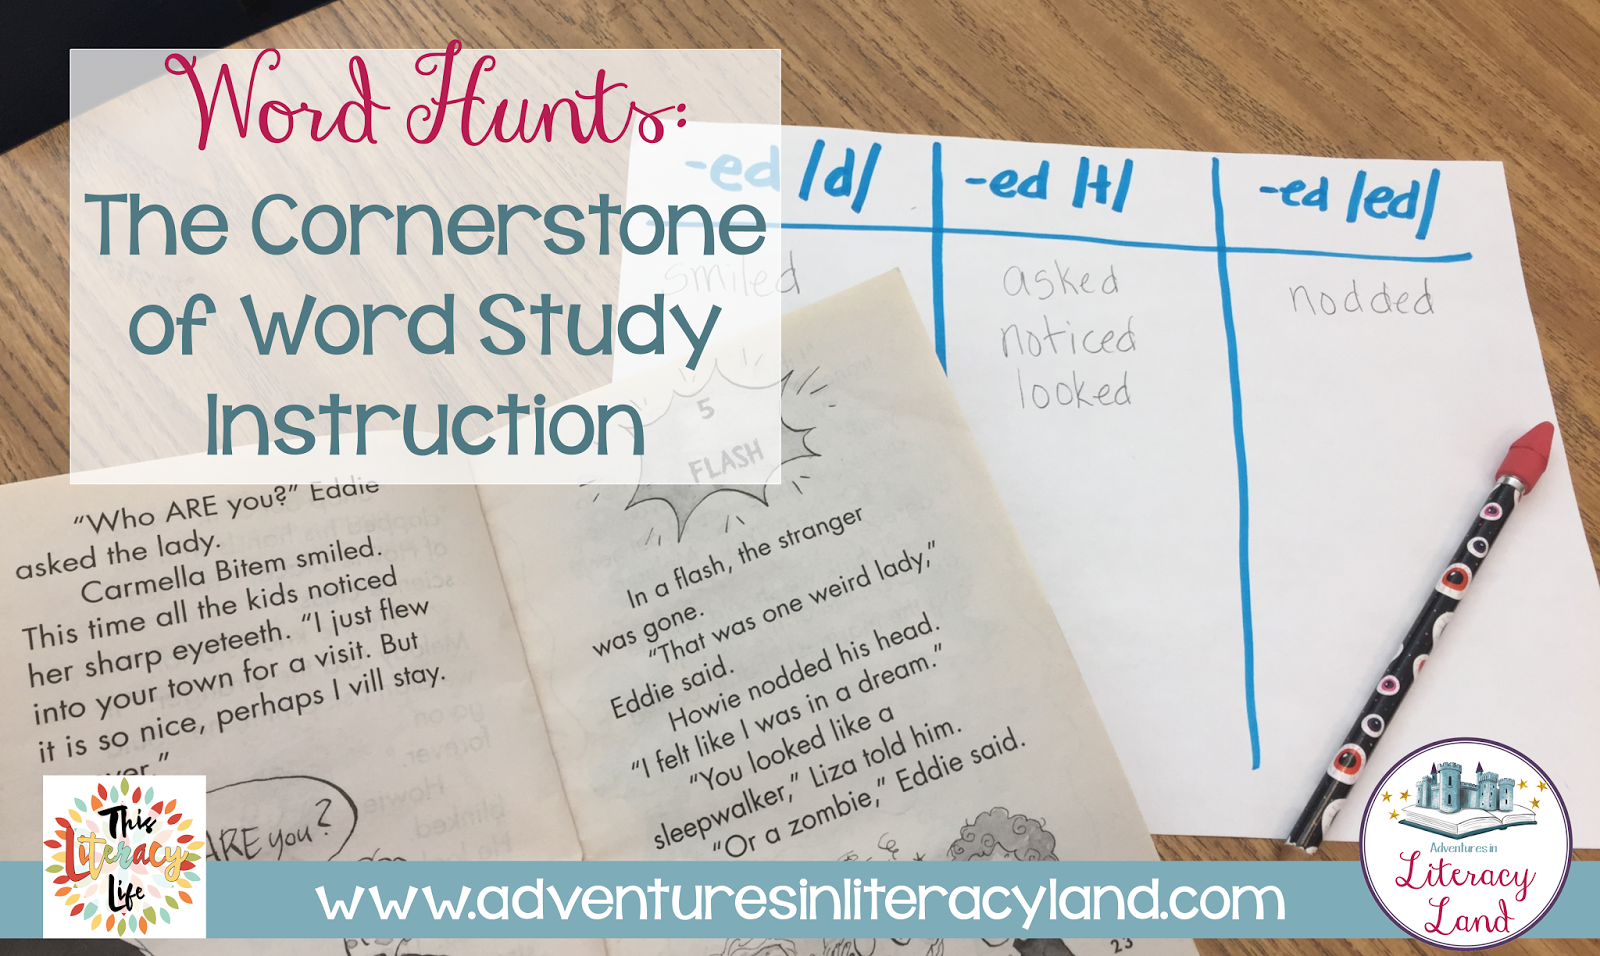 Word Hunts help to ensure that students really understand those features. Make sure they are done right with tips in this post.